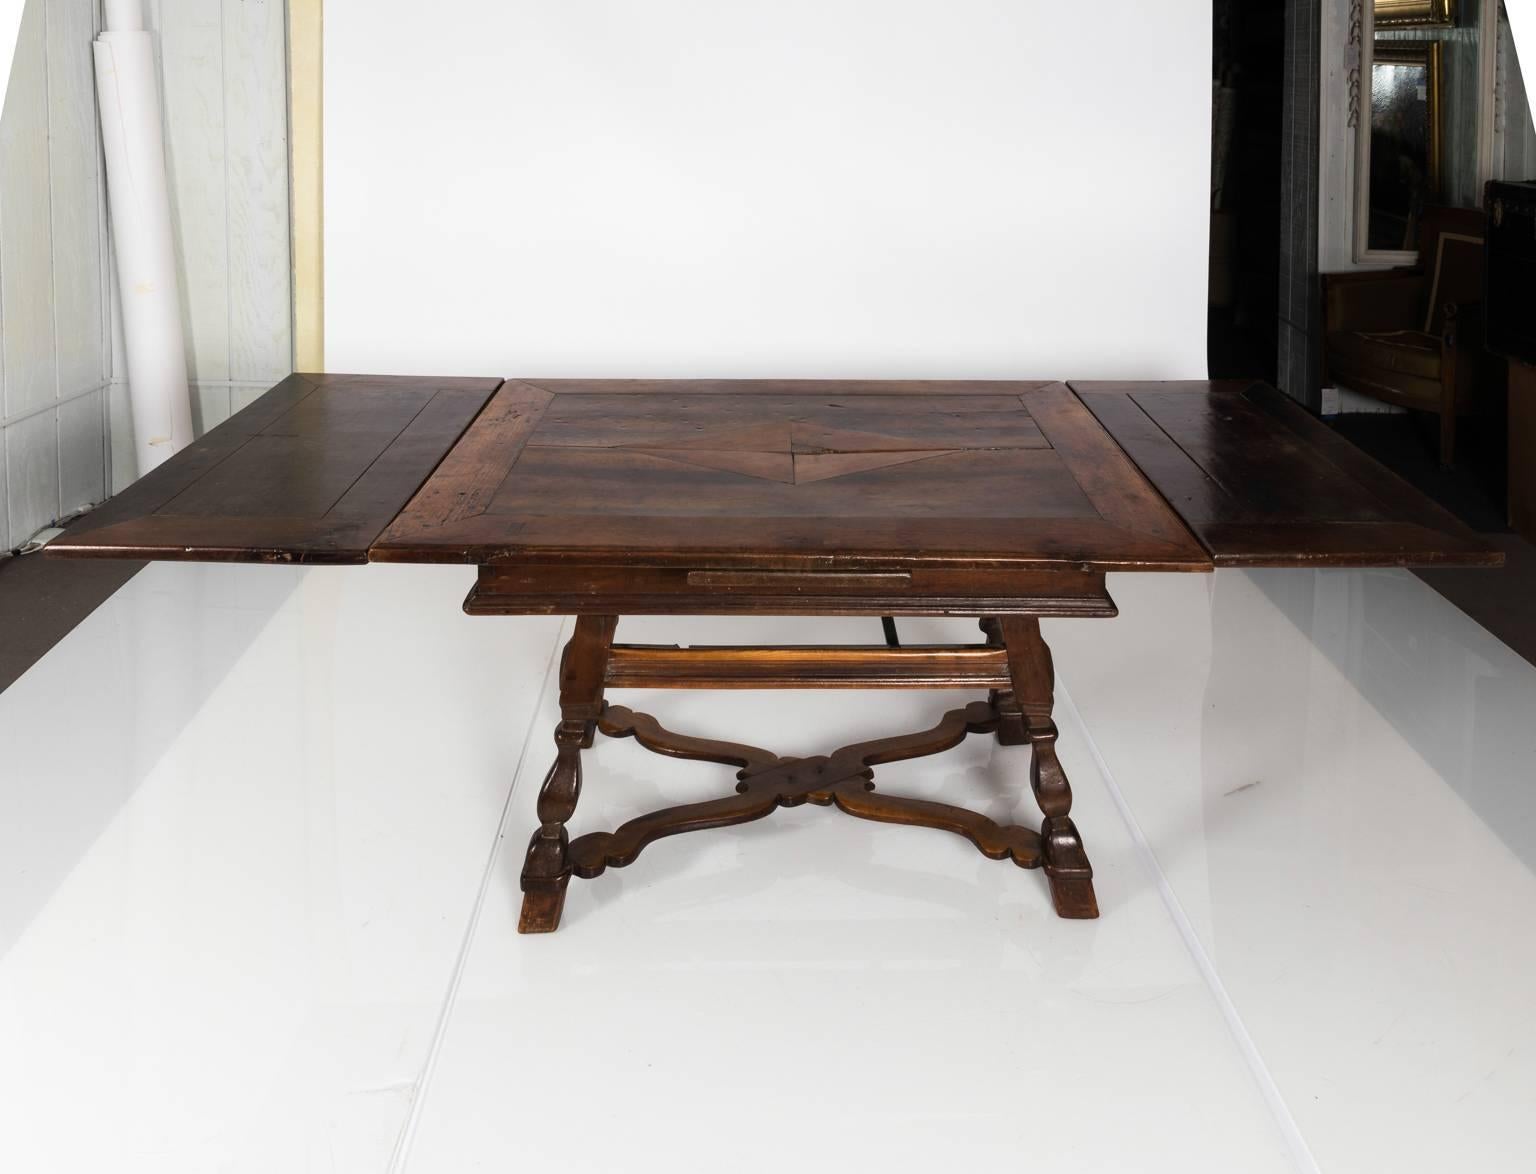 Italian table with one drawer and an X-shaped cross stretcher, circa early 20th century. The tabletop also features a starburst pattern with two leaves.
 